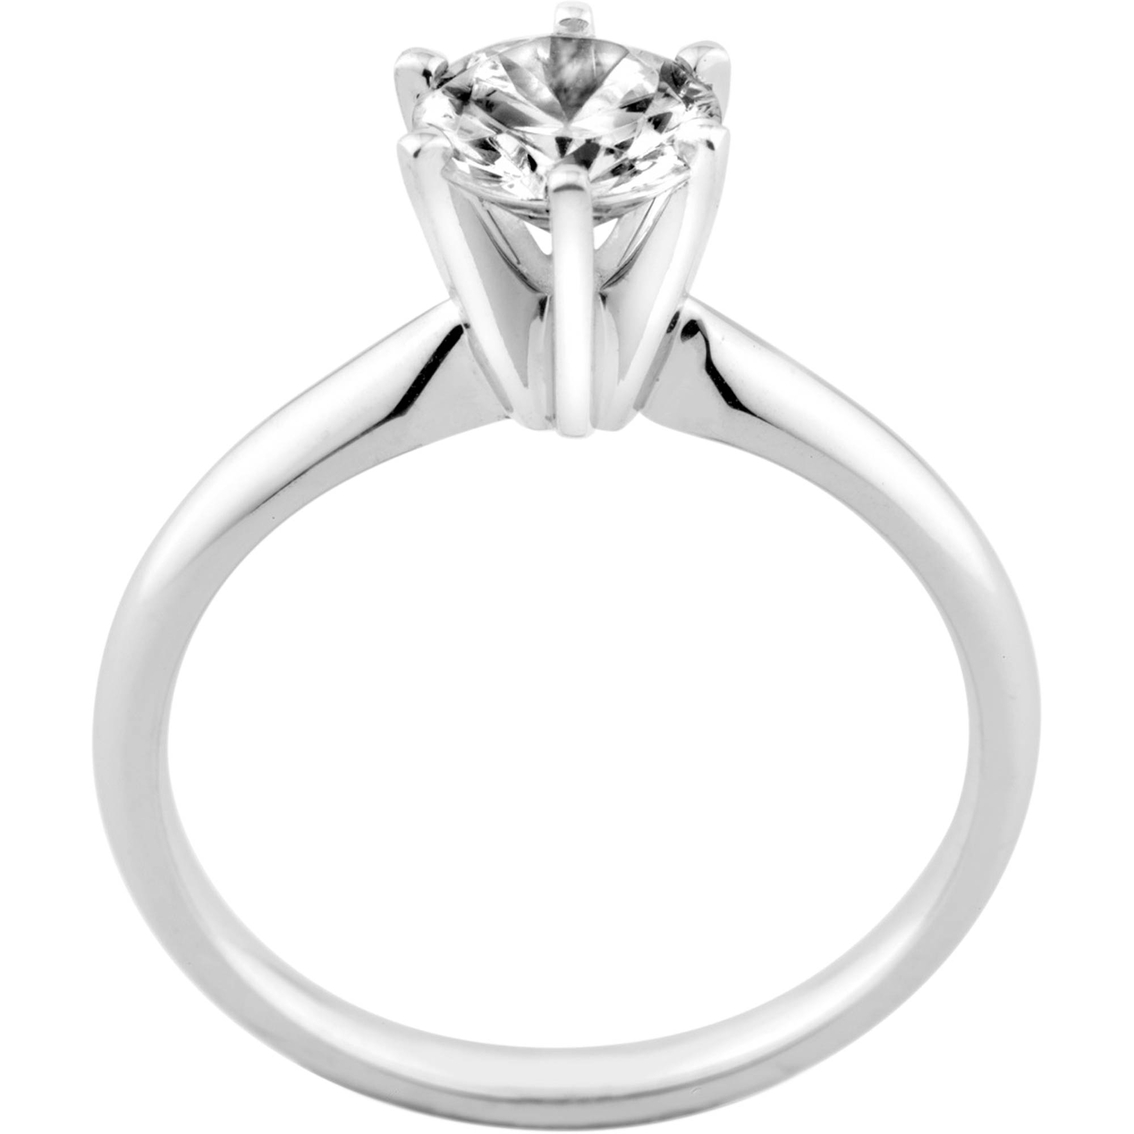 14K Gold 1/4 Ct. Diamond Solitaire Engagement Ring - Image 2 of 2